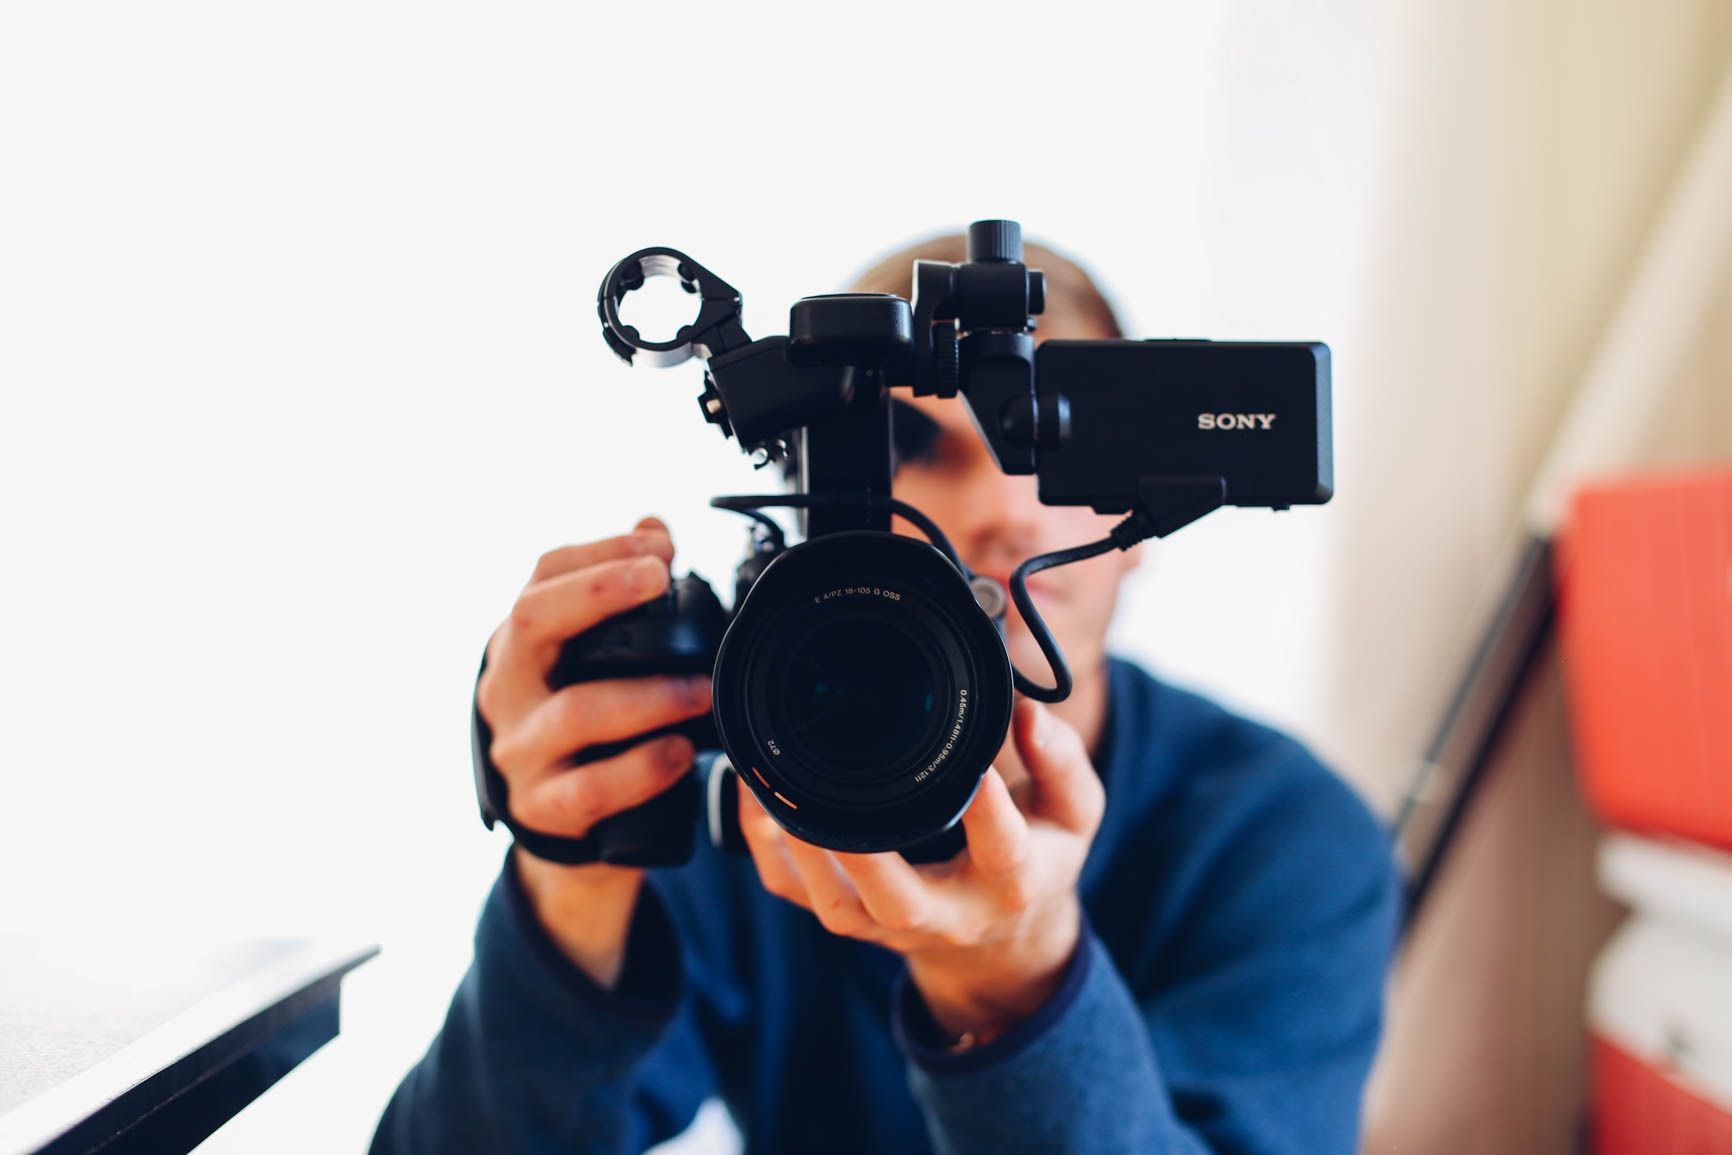 Marmation: Lights, Camera, Convert: How Video Marketing Can Drive Sales for Small Businesses